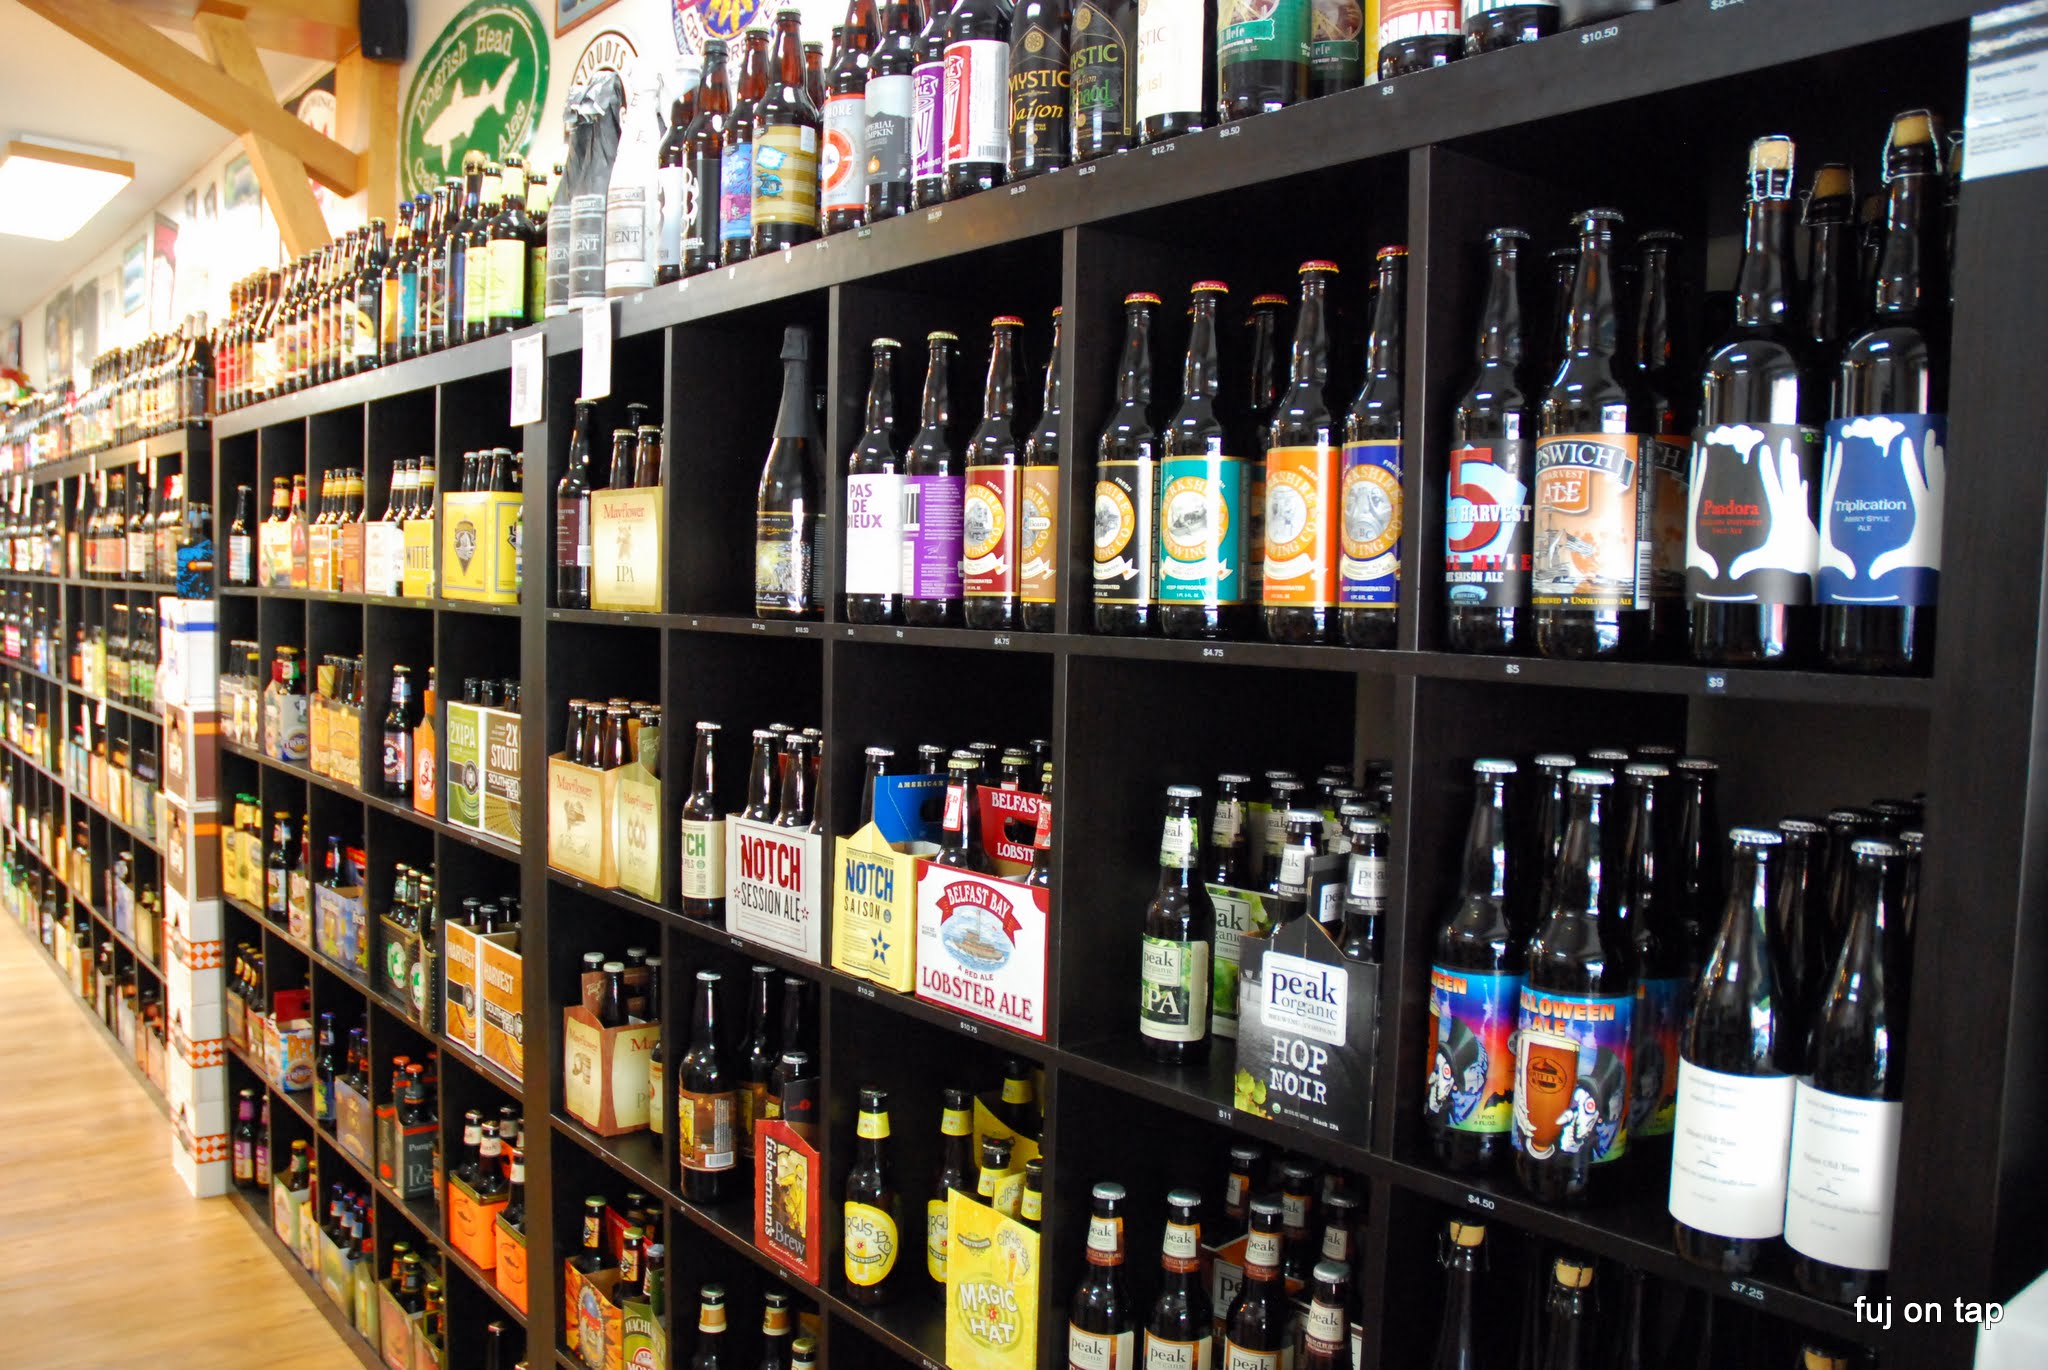 Bottle Shops Offer The Ultimate Beer Buying Experience | DRINKING IN